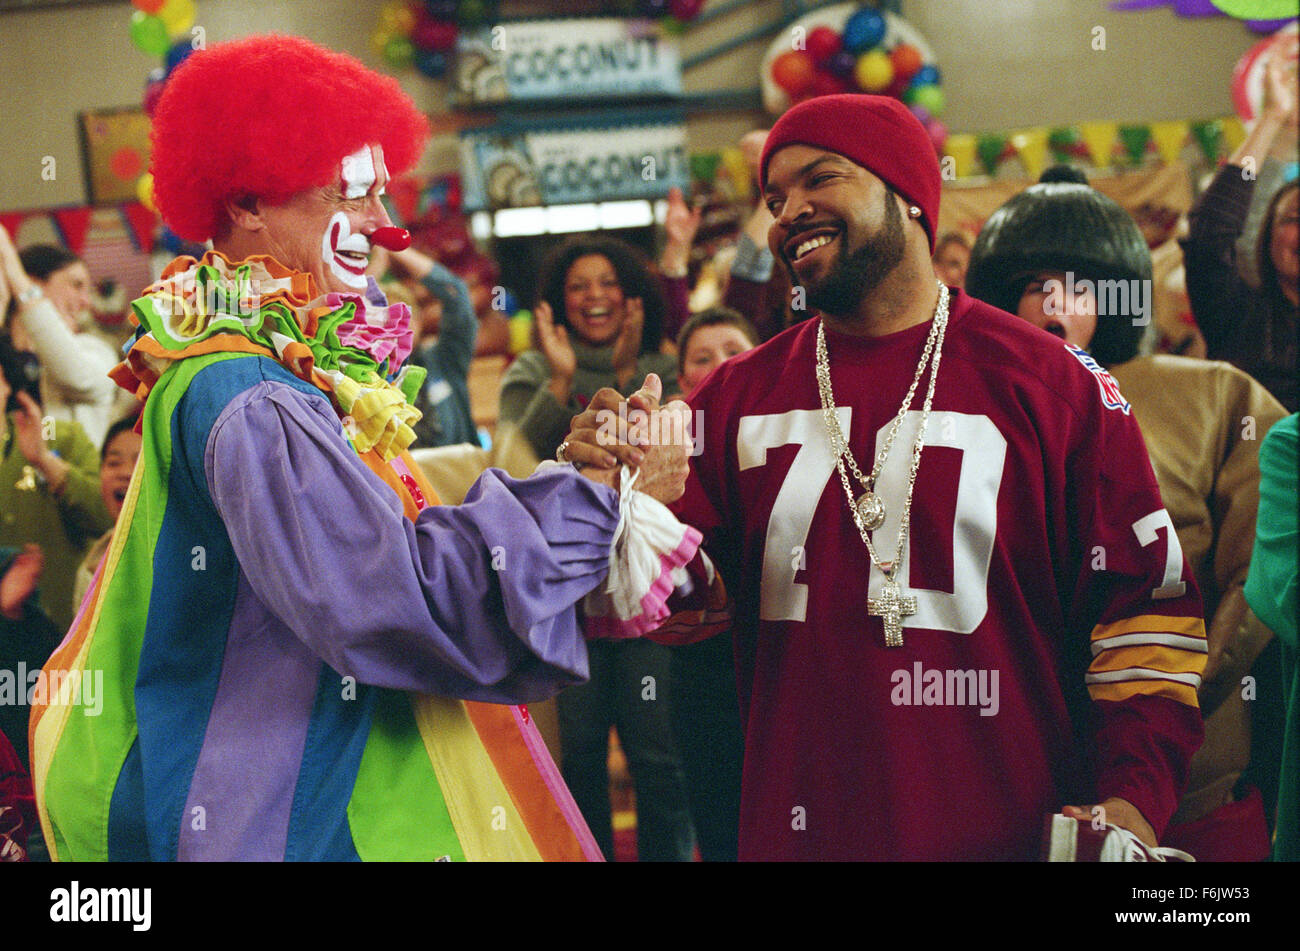 RELEASE DATE: January 21 , 2005   MOVIE TITLE: Are We There Yet   STUDIO: Revolution Studios   DIRECTOR: Brian Levant   PLOT: The fledgling romance between Nick, a playboy bachelor, and Suzanne, a divorced mother of two, is threatened by a particularly harrowing New Year's Eve. PICTURED: ICE CUBE as Nick Persons and JERRY HARDIN as clown.   (Credit Image: c Revolution Studios/Entertainment Pictures) Stock Photo